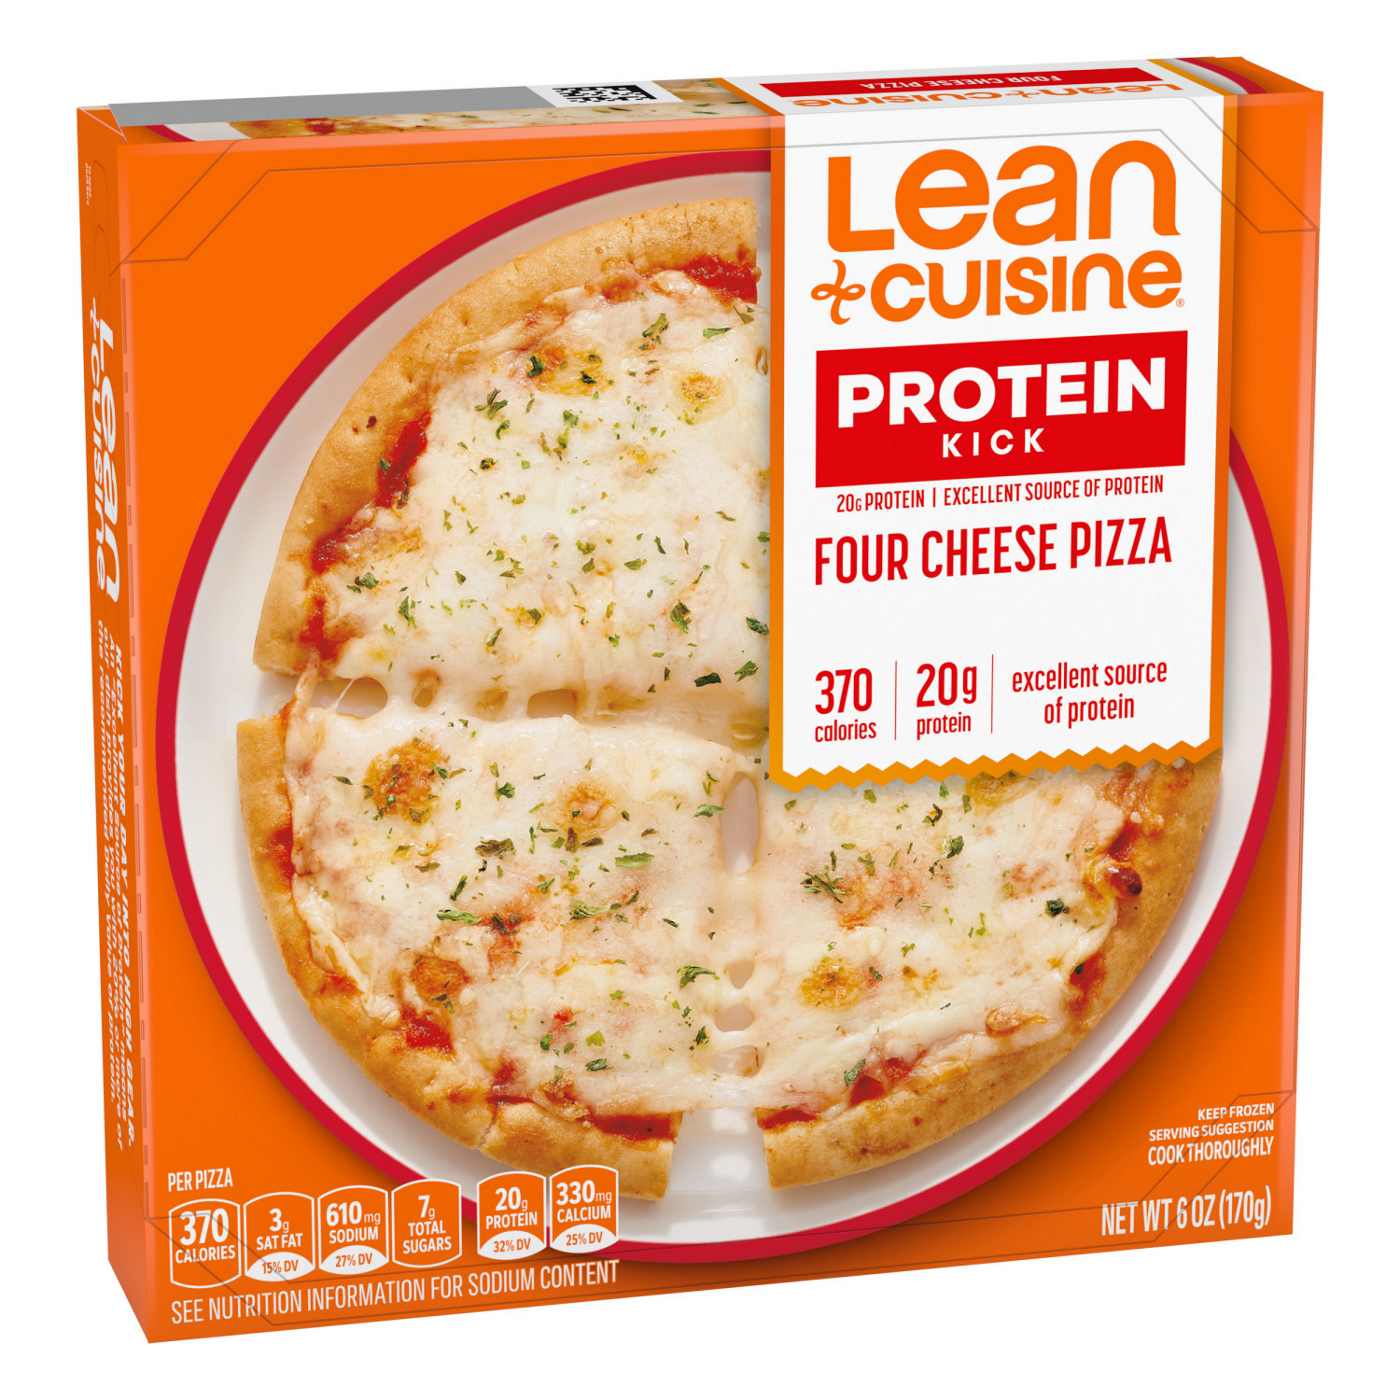 Lean Cuisine 20g Protein Four Cheese Frozen Pizza; image 5 of 7